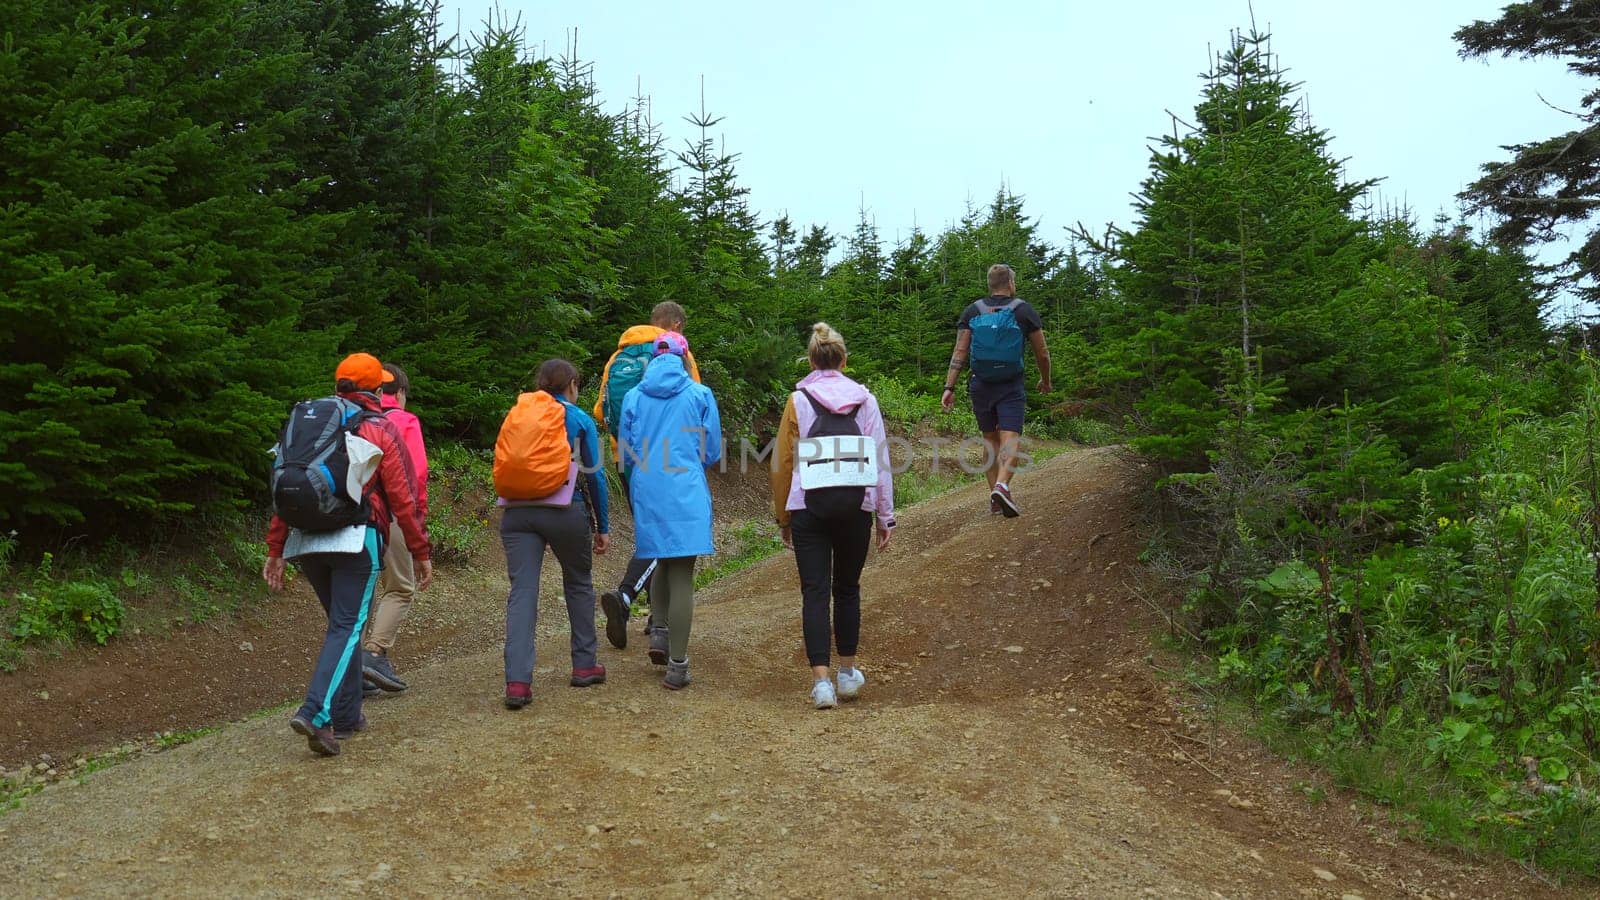 Tourists climb road in green forest area. Clip. Group of people is walking along road among green fir trees. Hikers travel in group on road in wooded area on cloudy day.